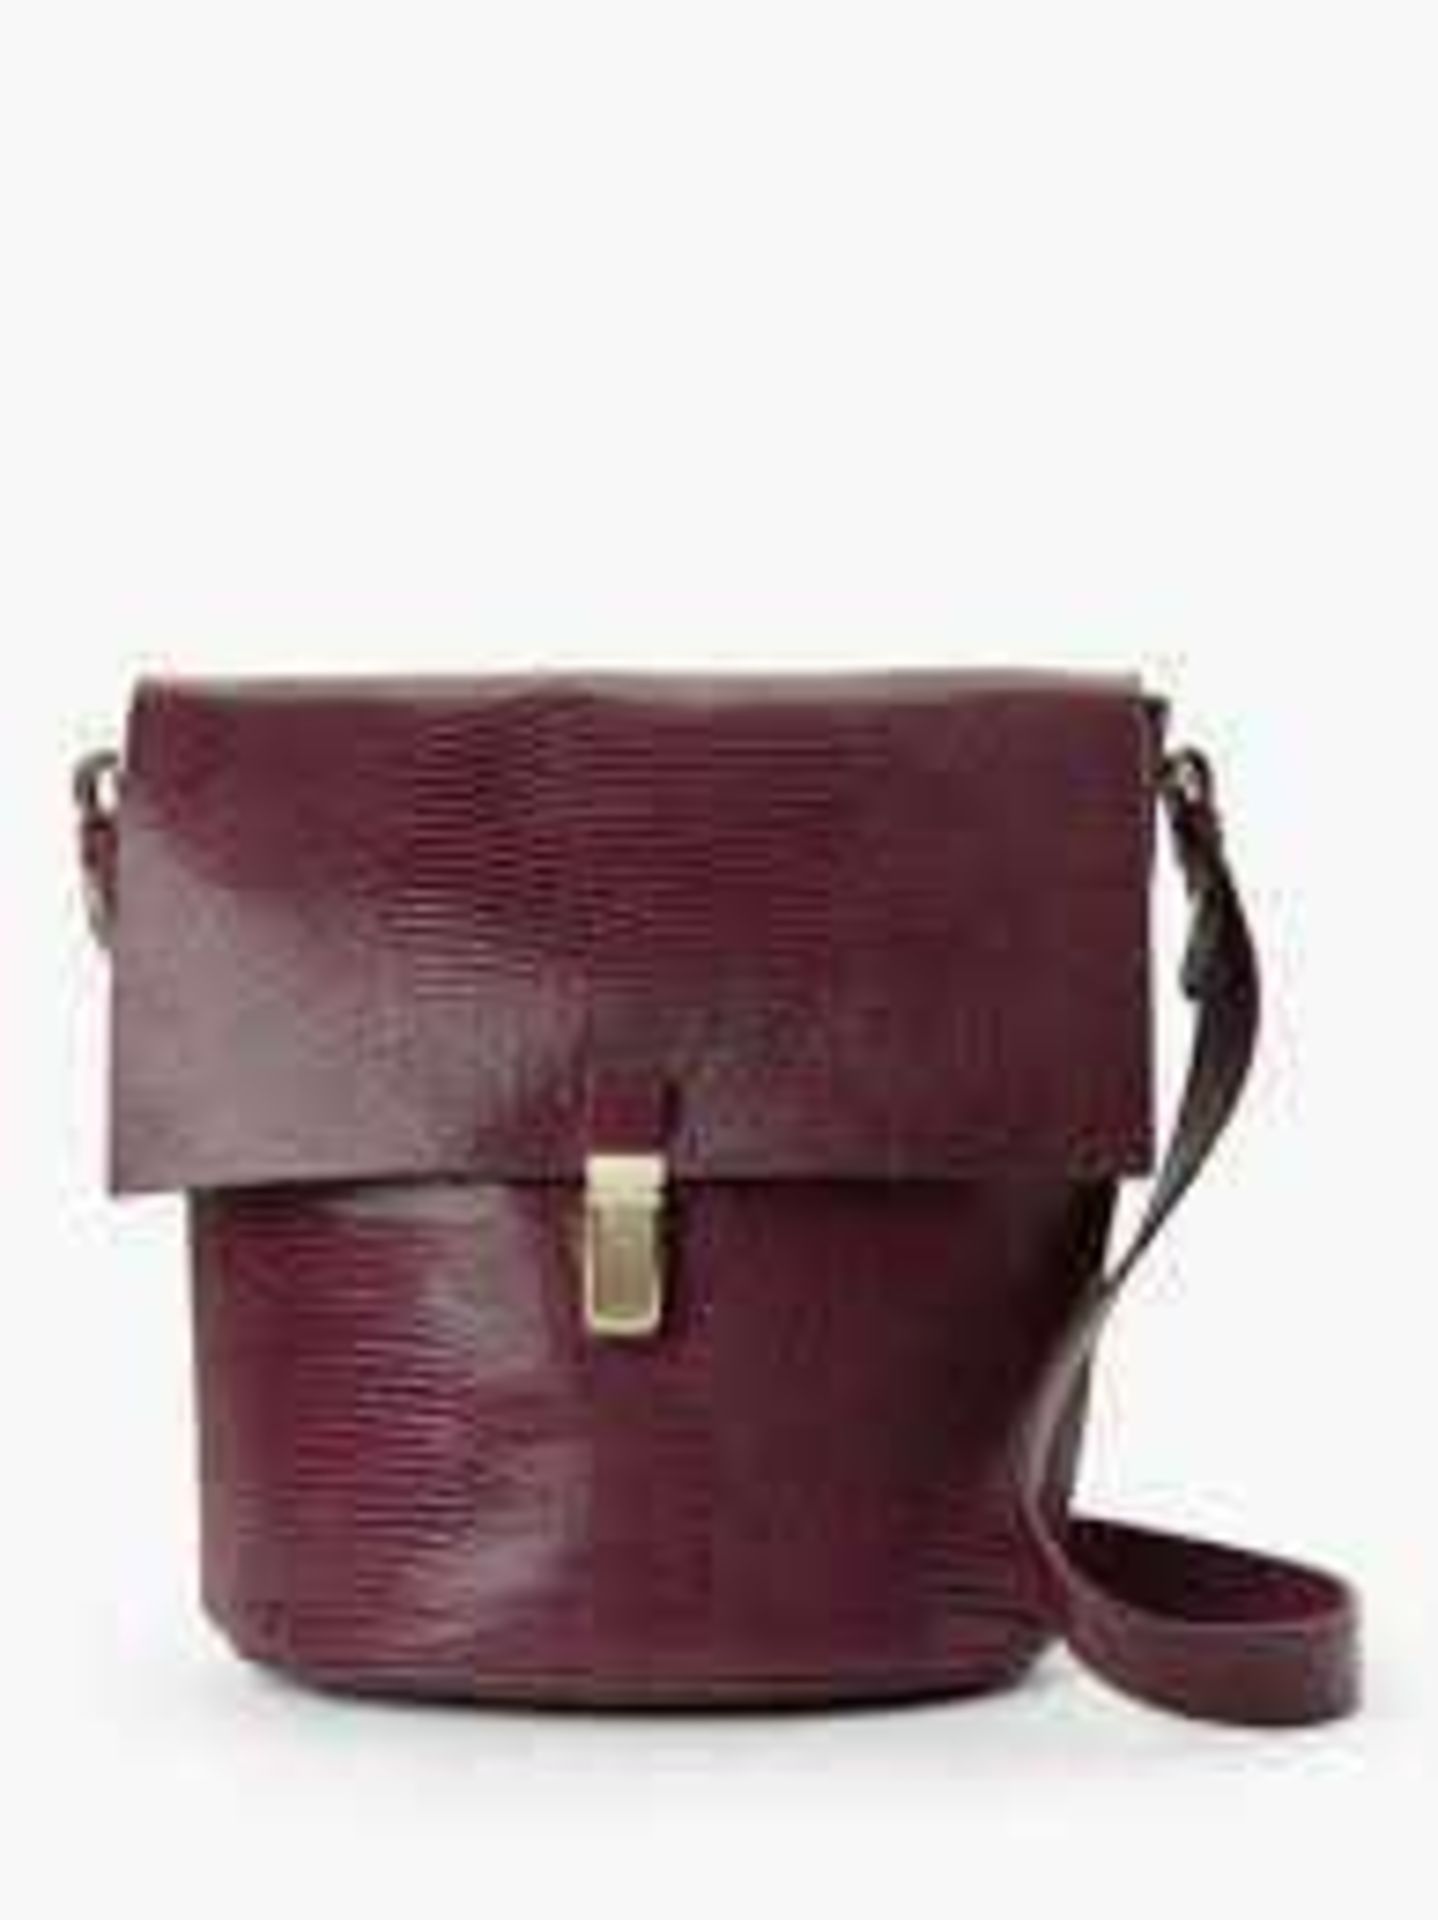 RRP £140 Ladies John Lewis And Partners Burgundy Leather Cross Body Bag 2.143 (Appraisals